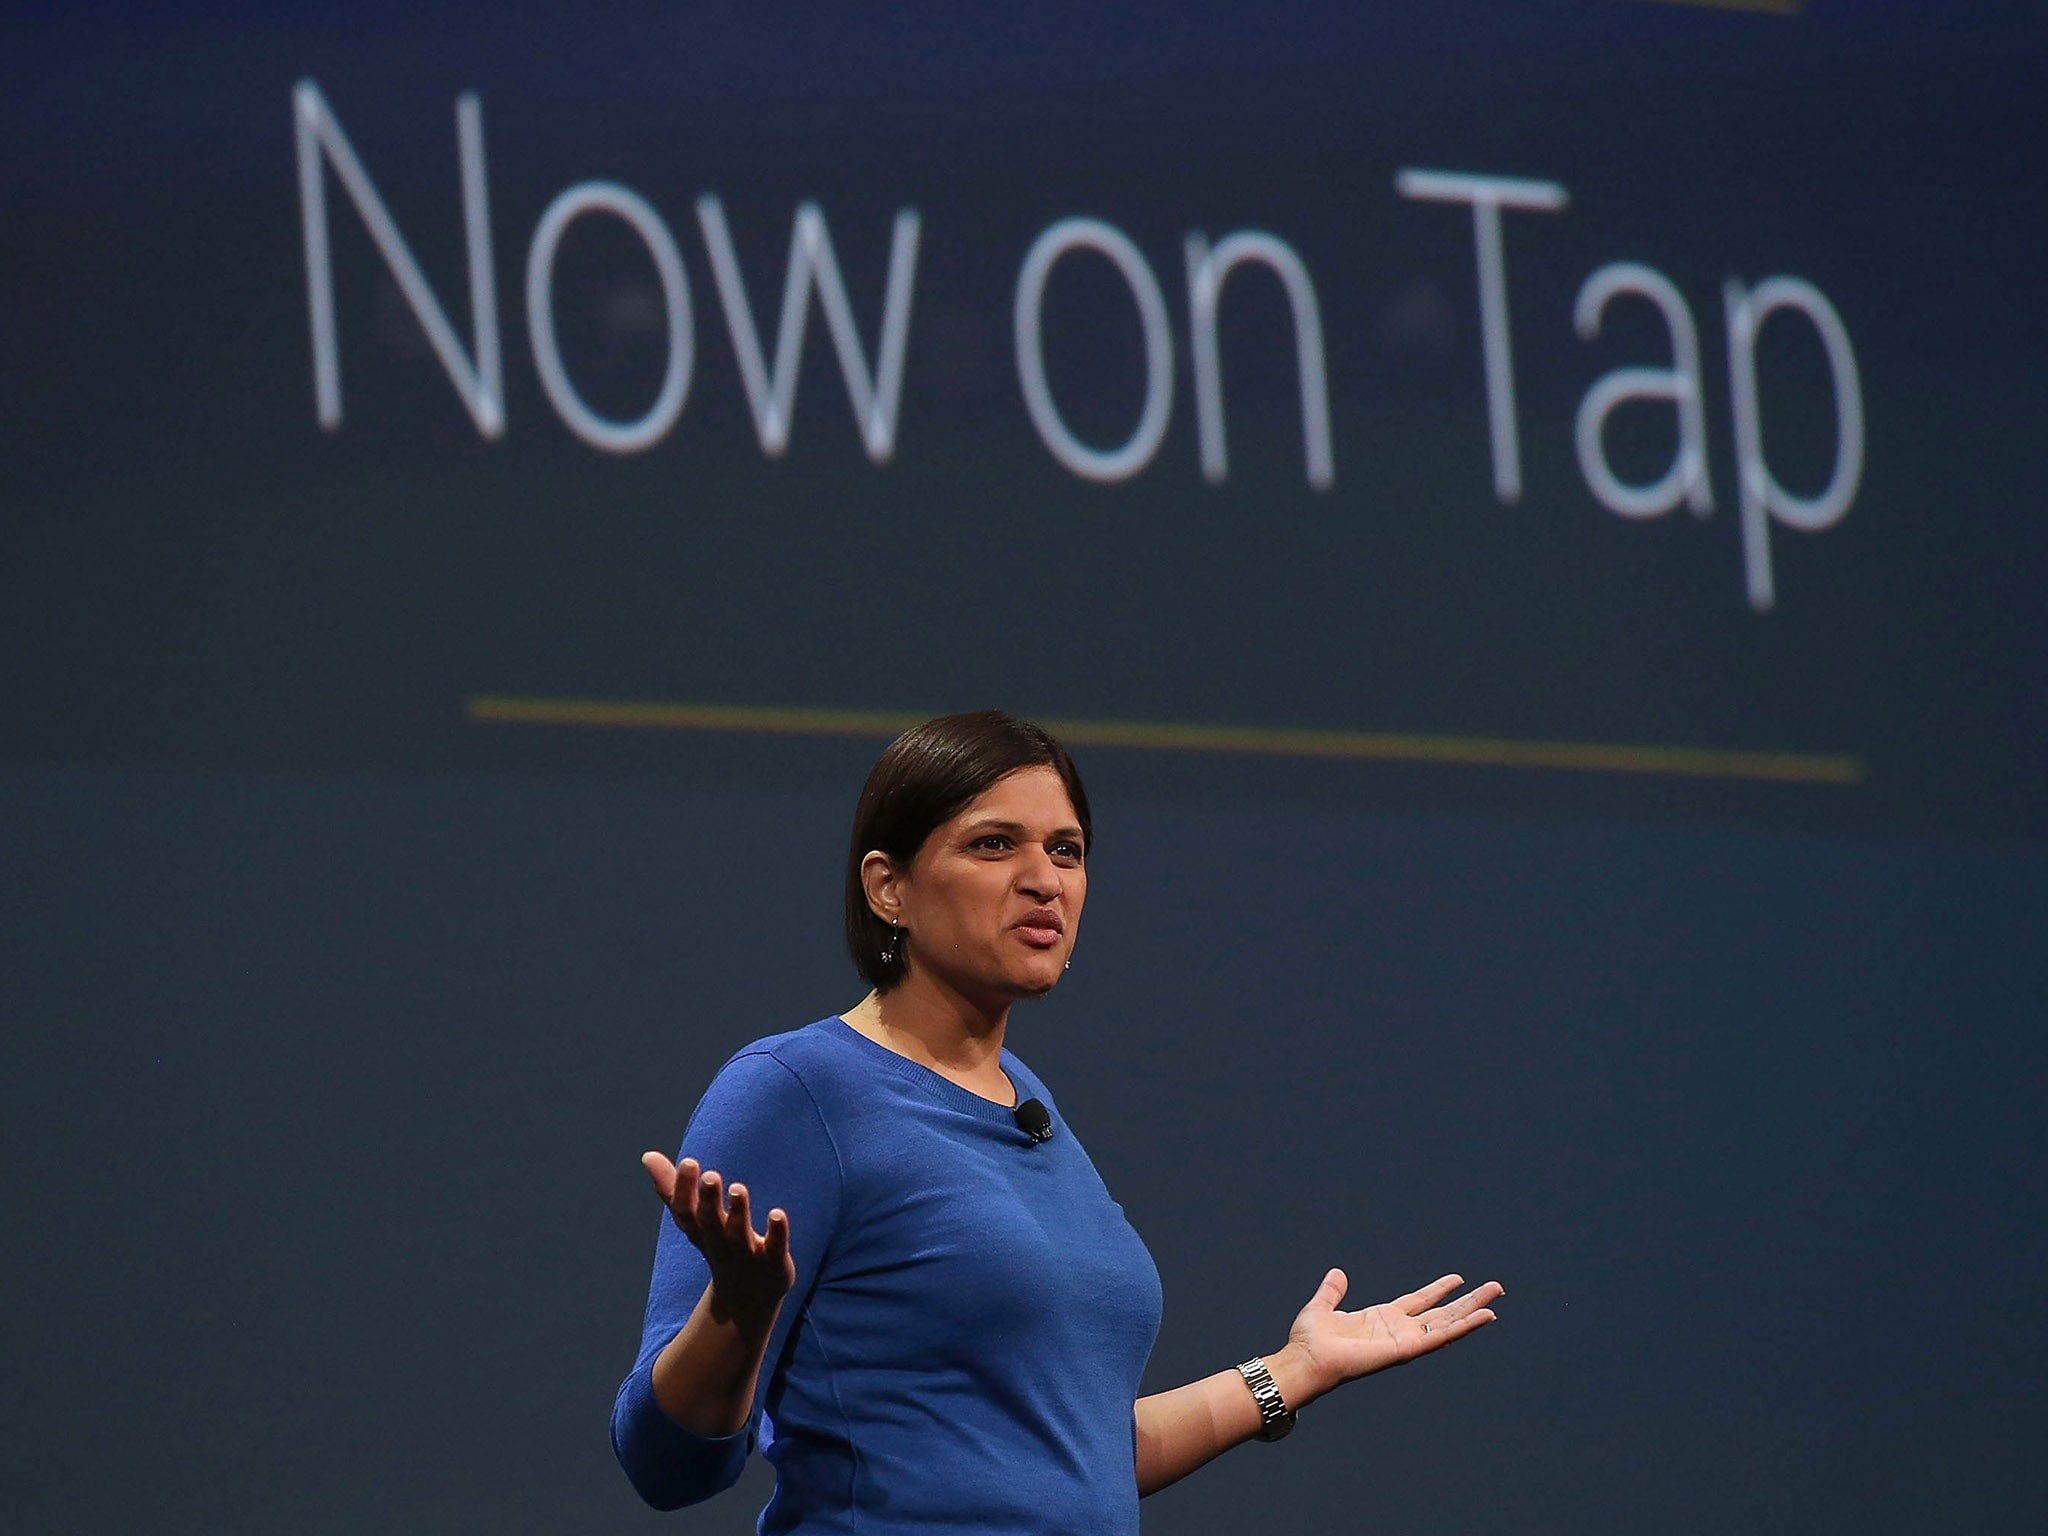 Google Now director Aparna Chennapragada announces 'Now On Tap' during the 2015 Google I/O conference